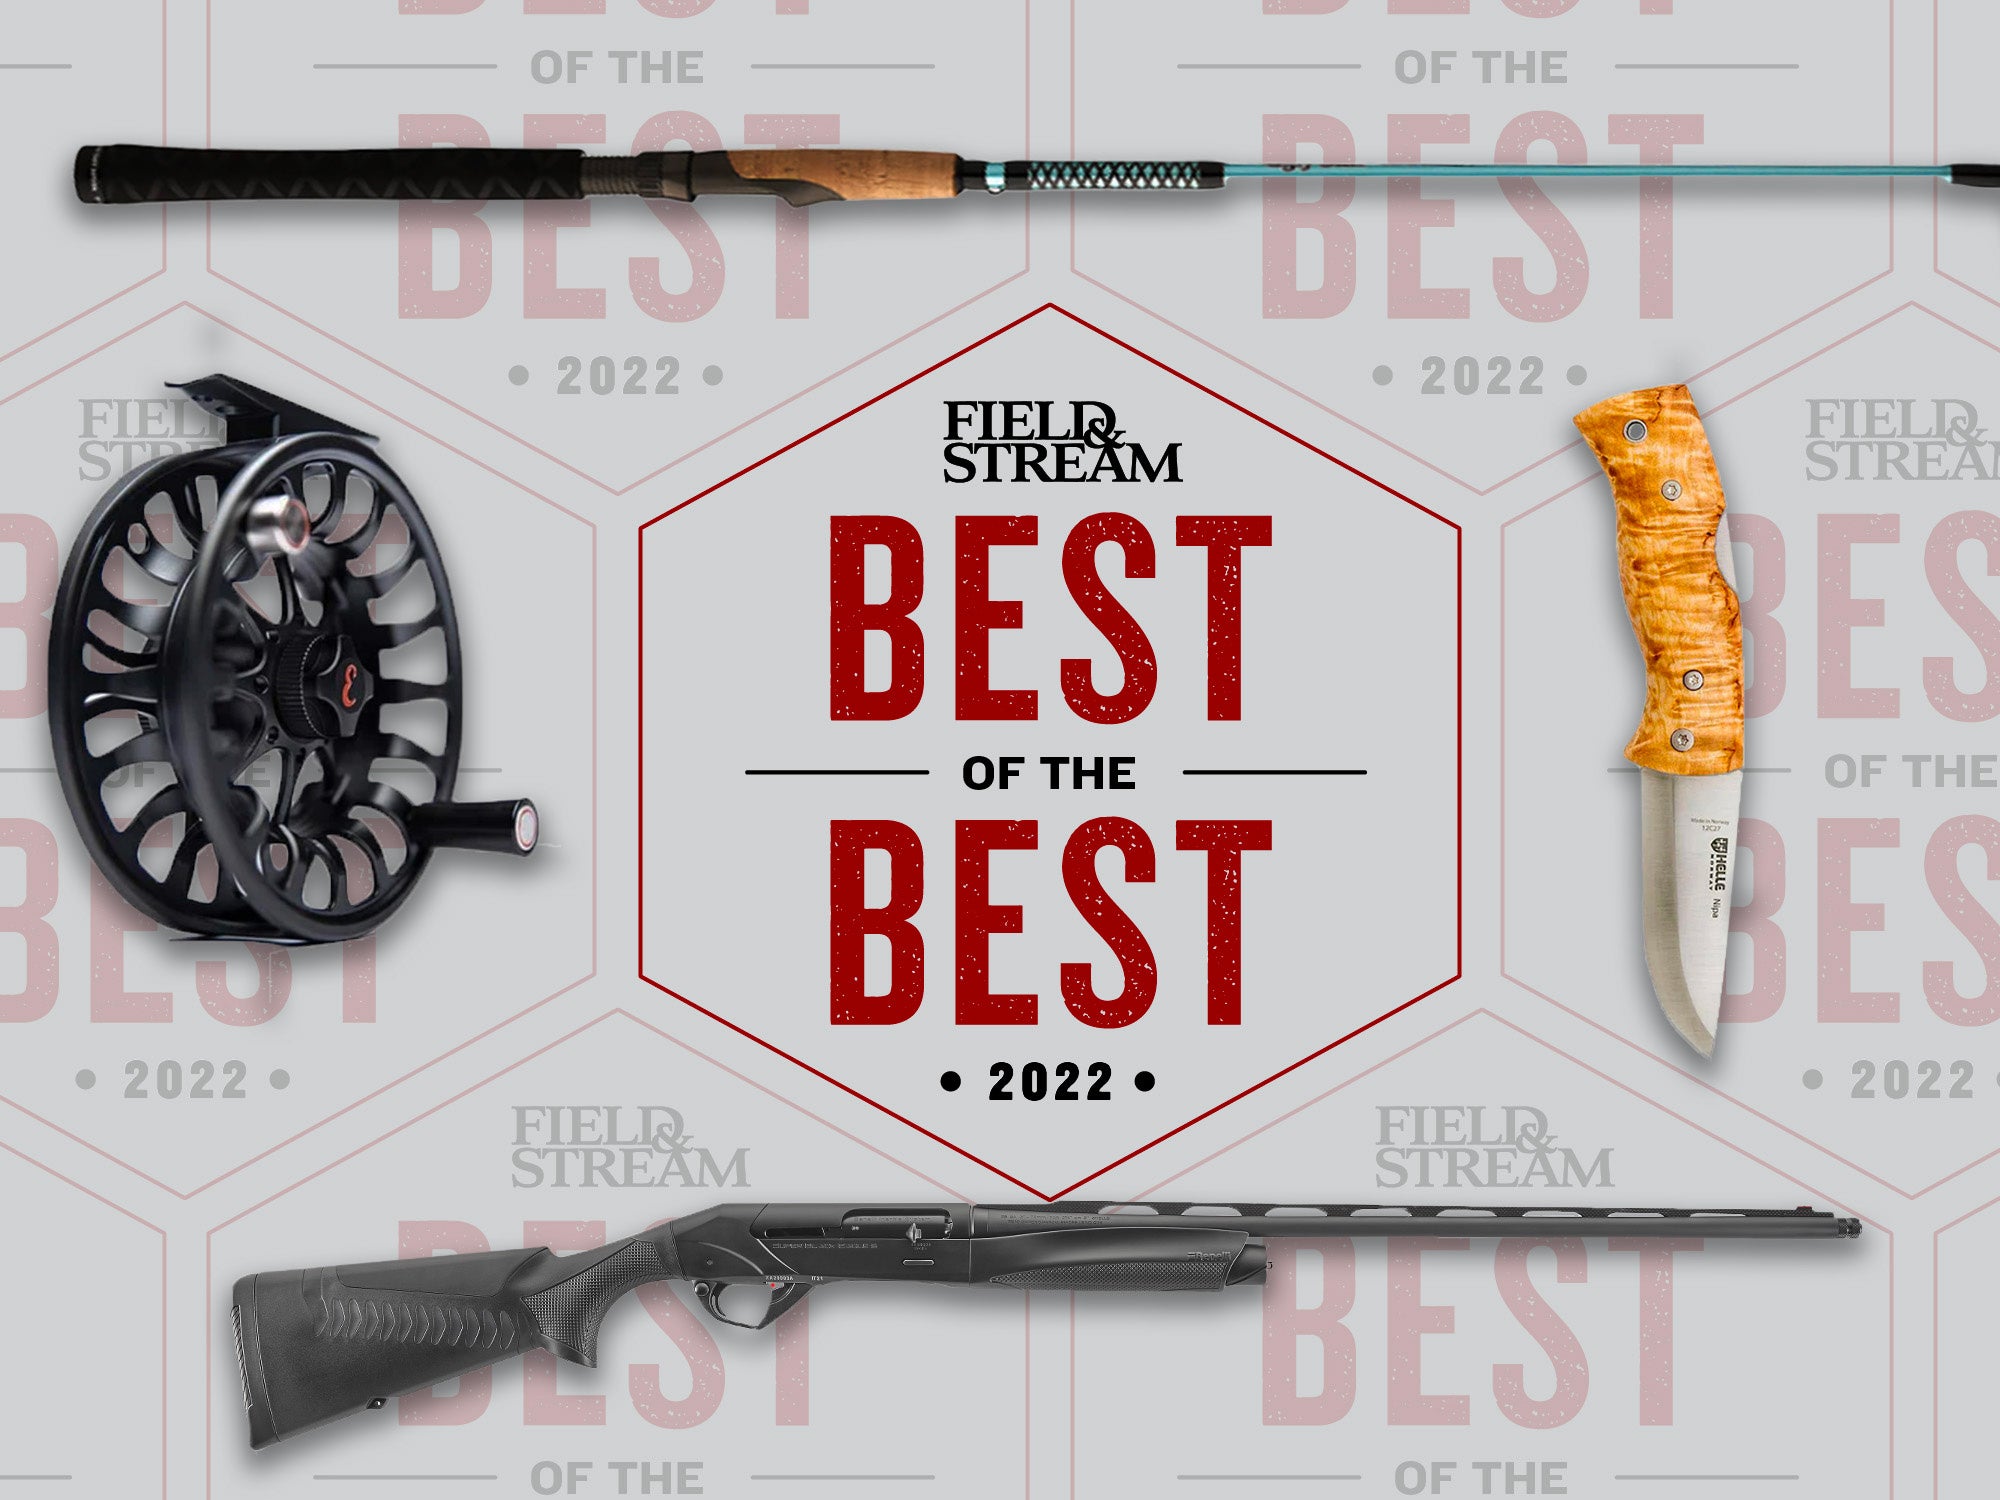 The Fishing Hunting Store: The Best Hunting and Fishing Gear